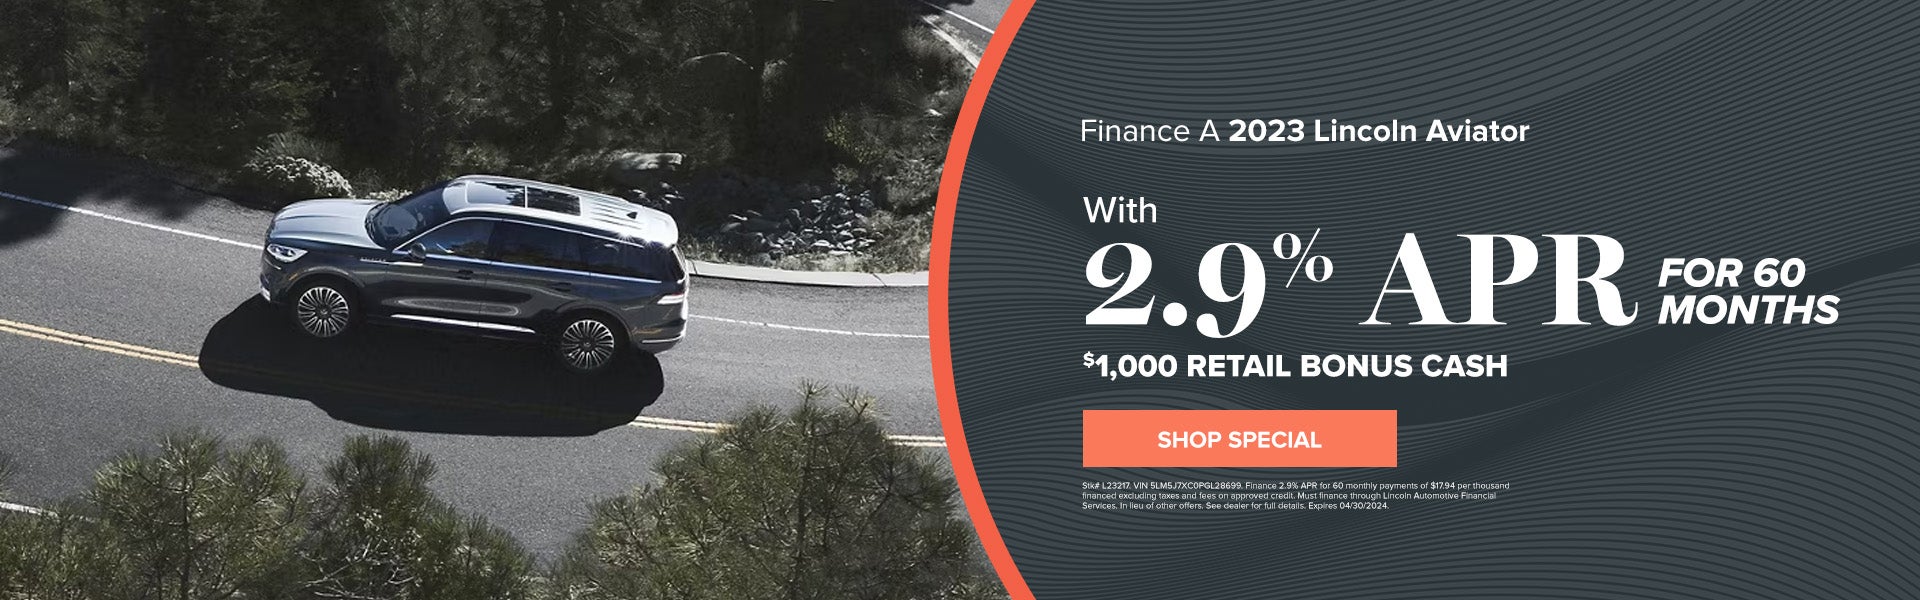 Finance a 2023 Lincoln Aviator With 2.9% APR For 60 Month